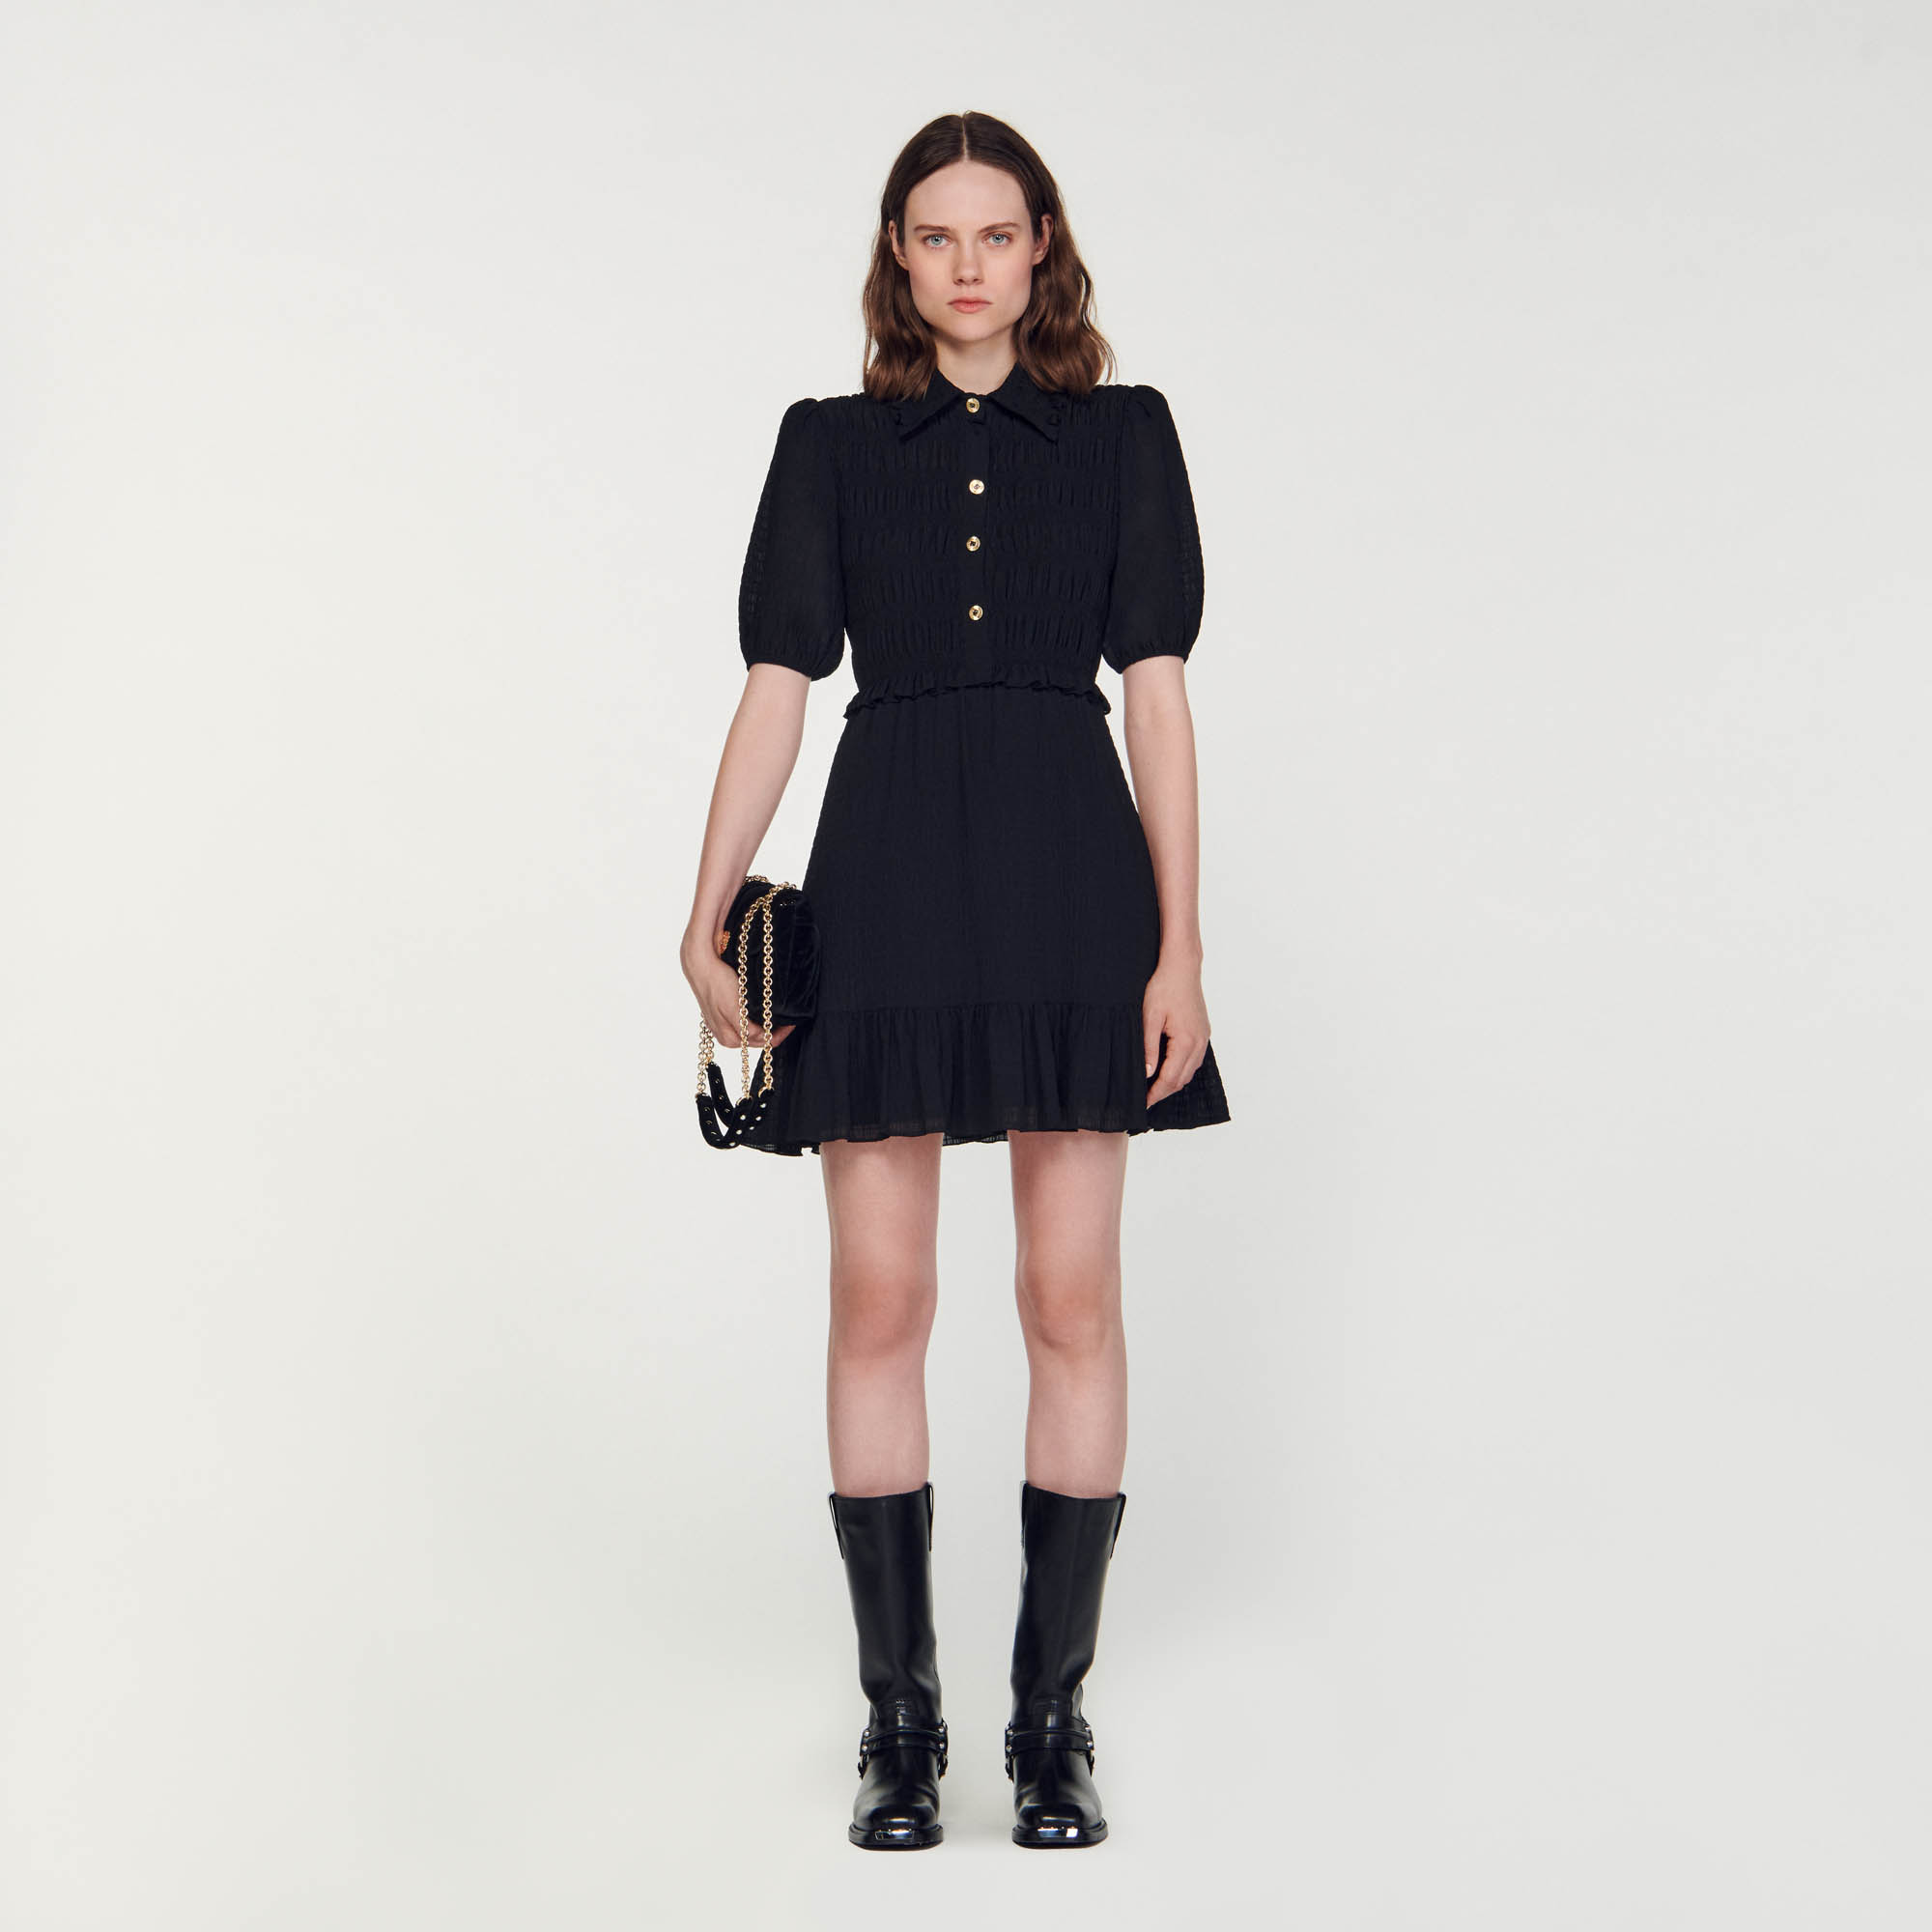 Sandro polyester Lining: Short dress with button-down shirt collar and short sleeves, embellished with smocking at the top and a floaty, billowy skirt with ruffles at the bottom